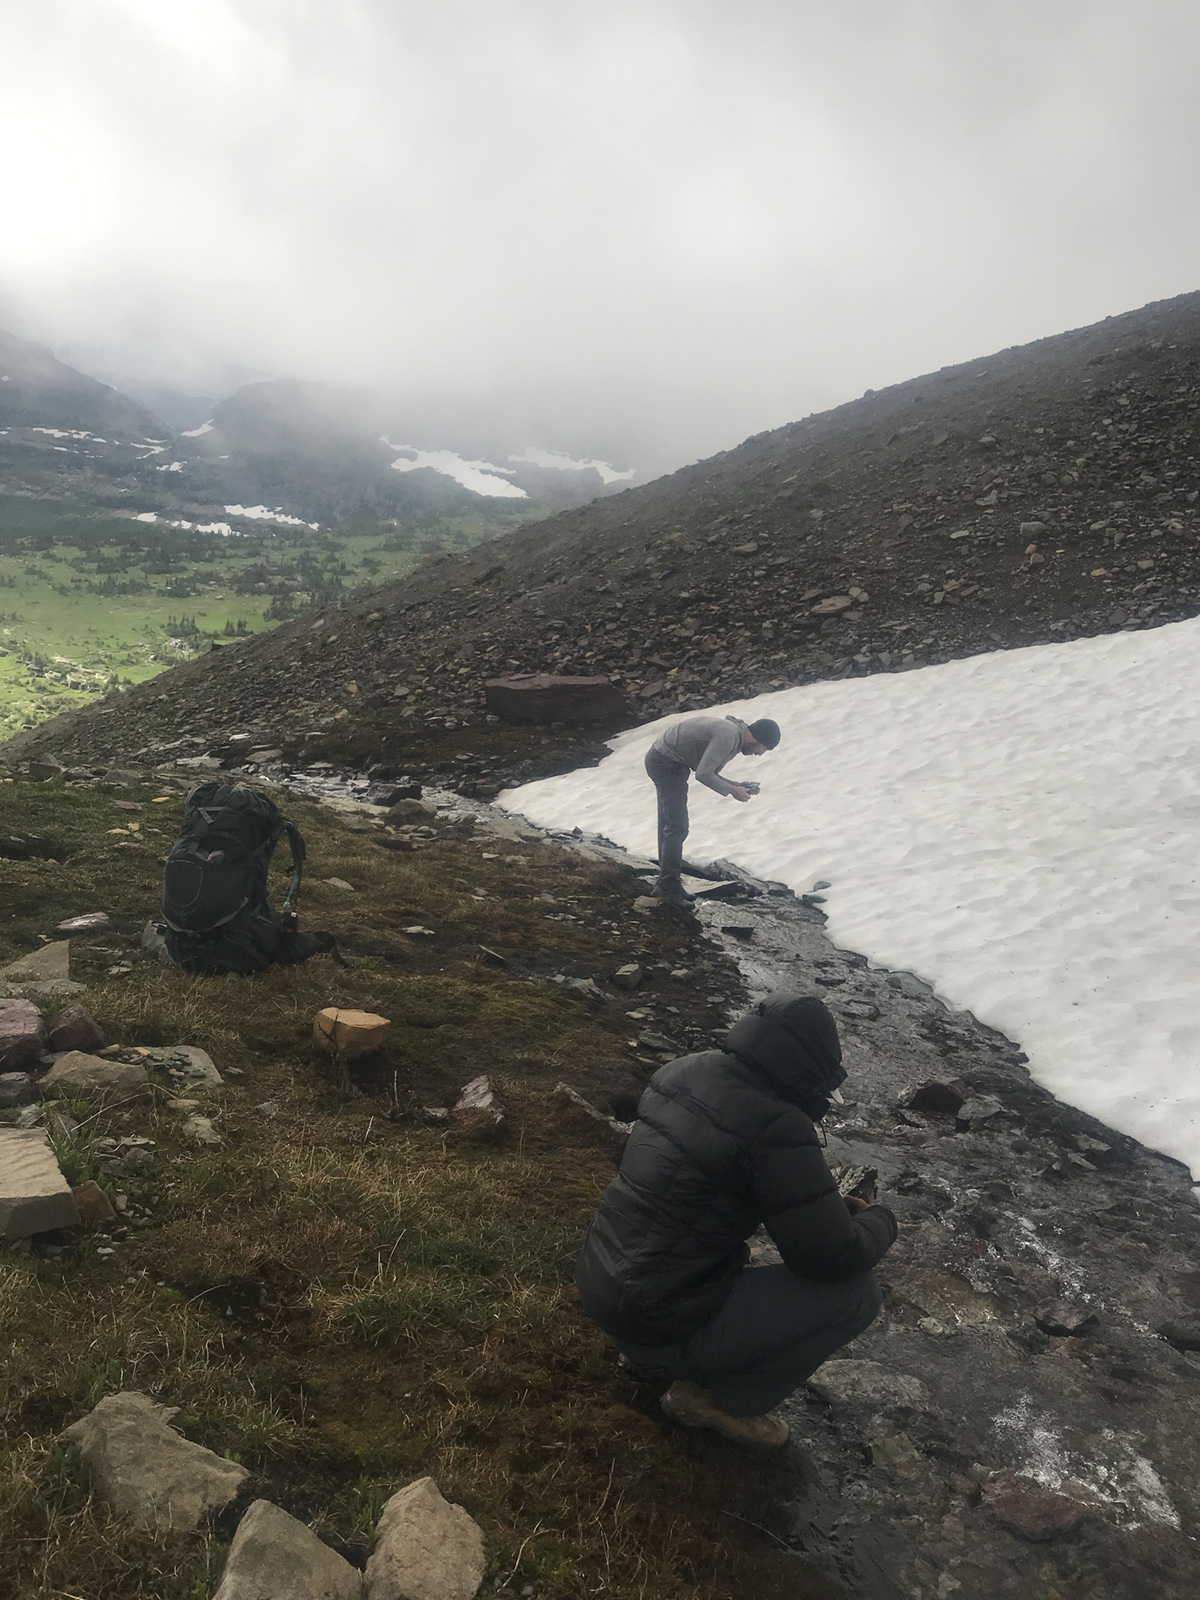 Two researchers look into a clear rocky stream running between a white snowfield to its right and grassy land to its left.